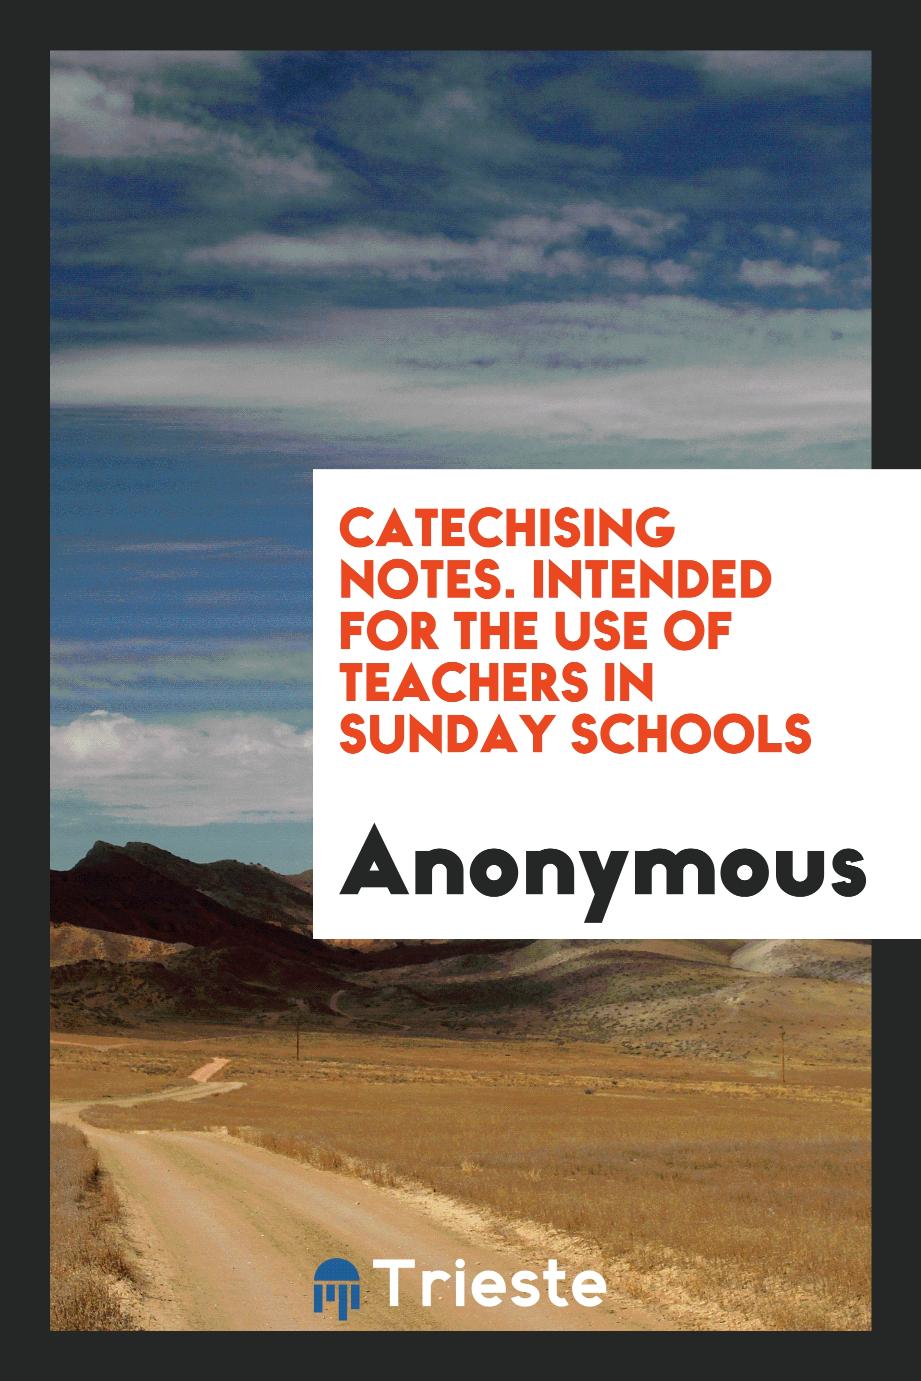 Catechising notes. Intended for the use of teachers in Sunday schools